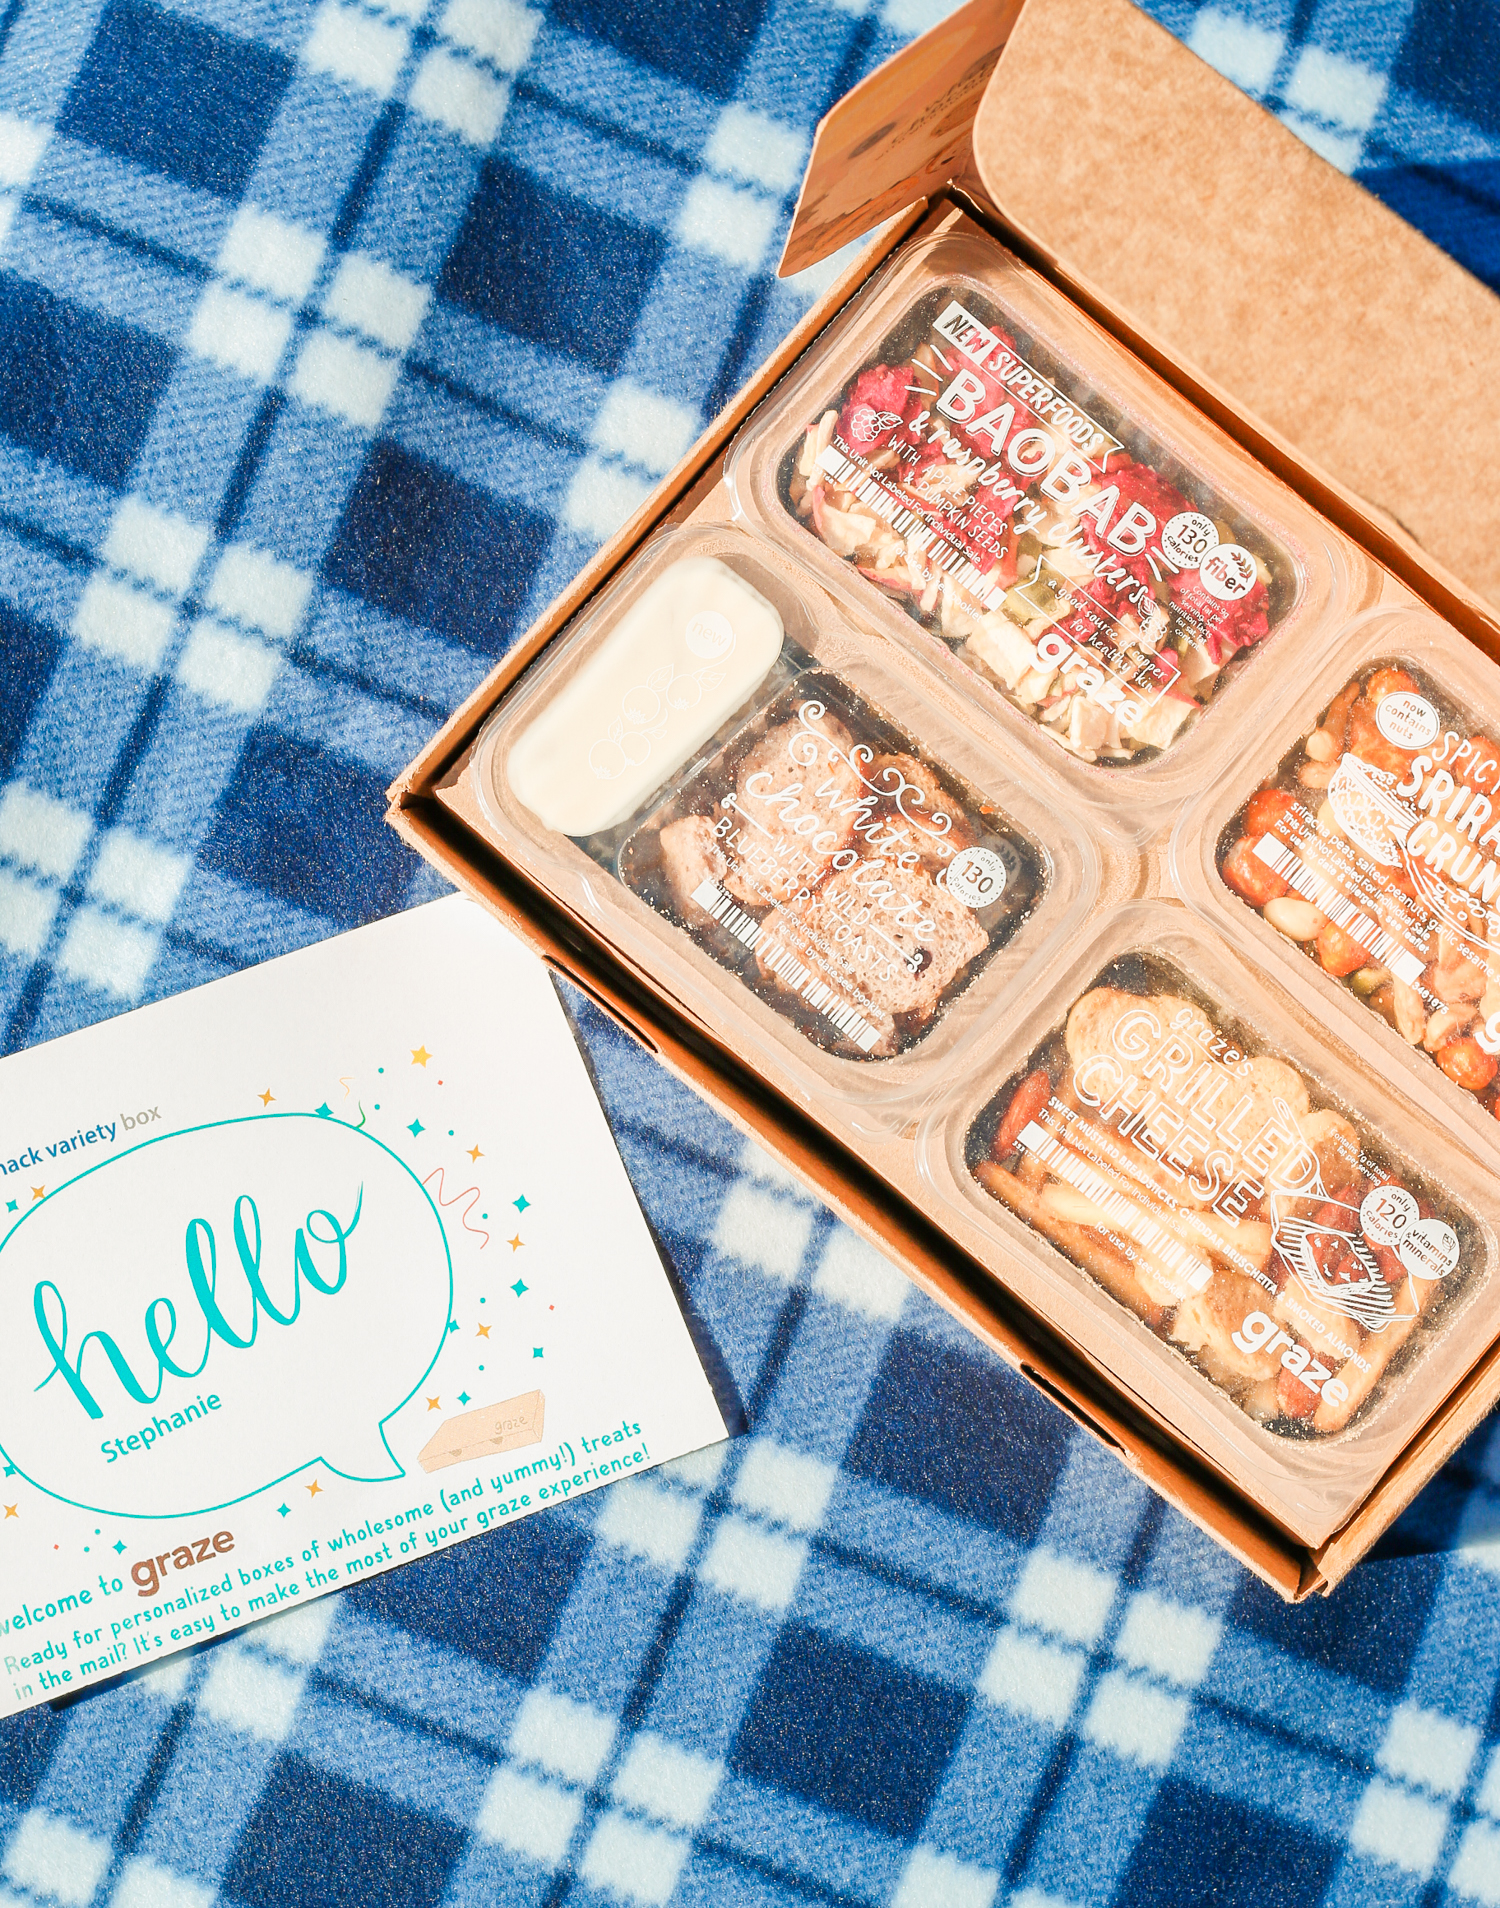 Graze snack box review, Graze monthly snack delivery service review, Graze snack packs, how to get a free Graze snack box, healthy snack boxes from Graze, Grazing Made Easy: The New Way to Snack Smarter by southern lifestyle blogger Stephanie Ziajka from Diary of a Debutante